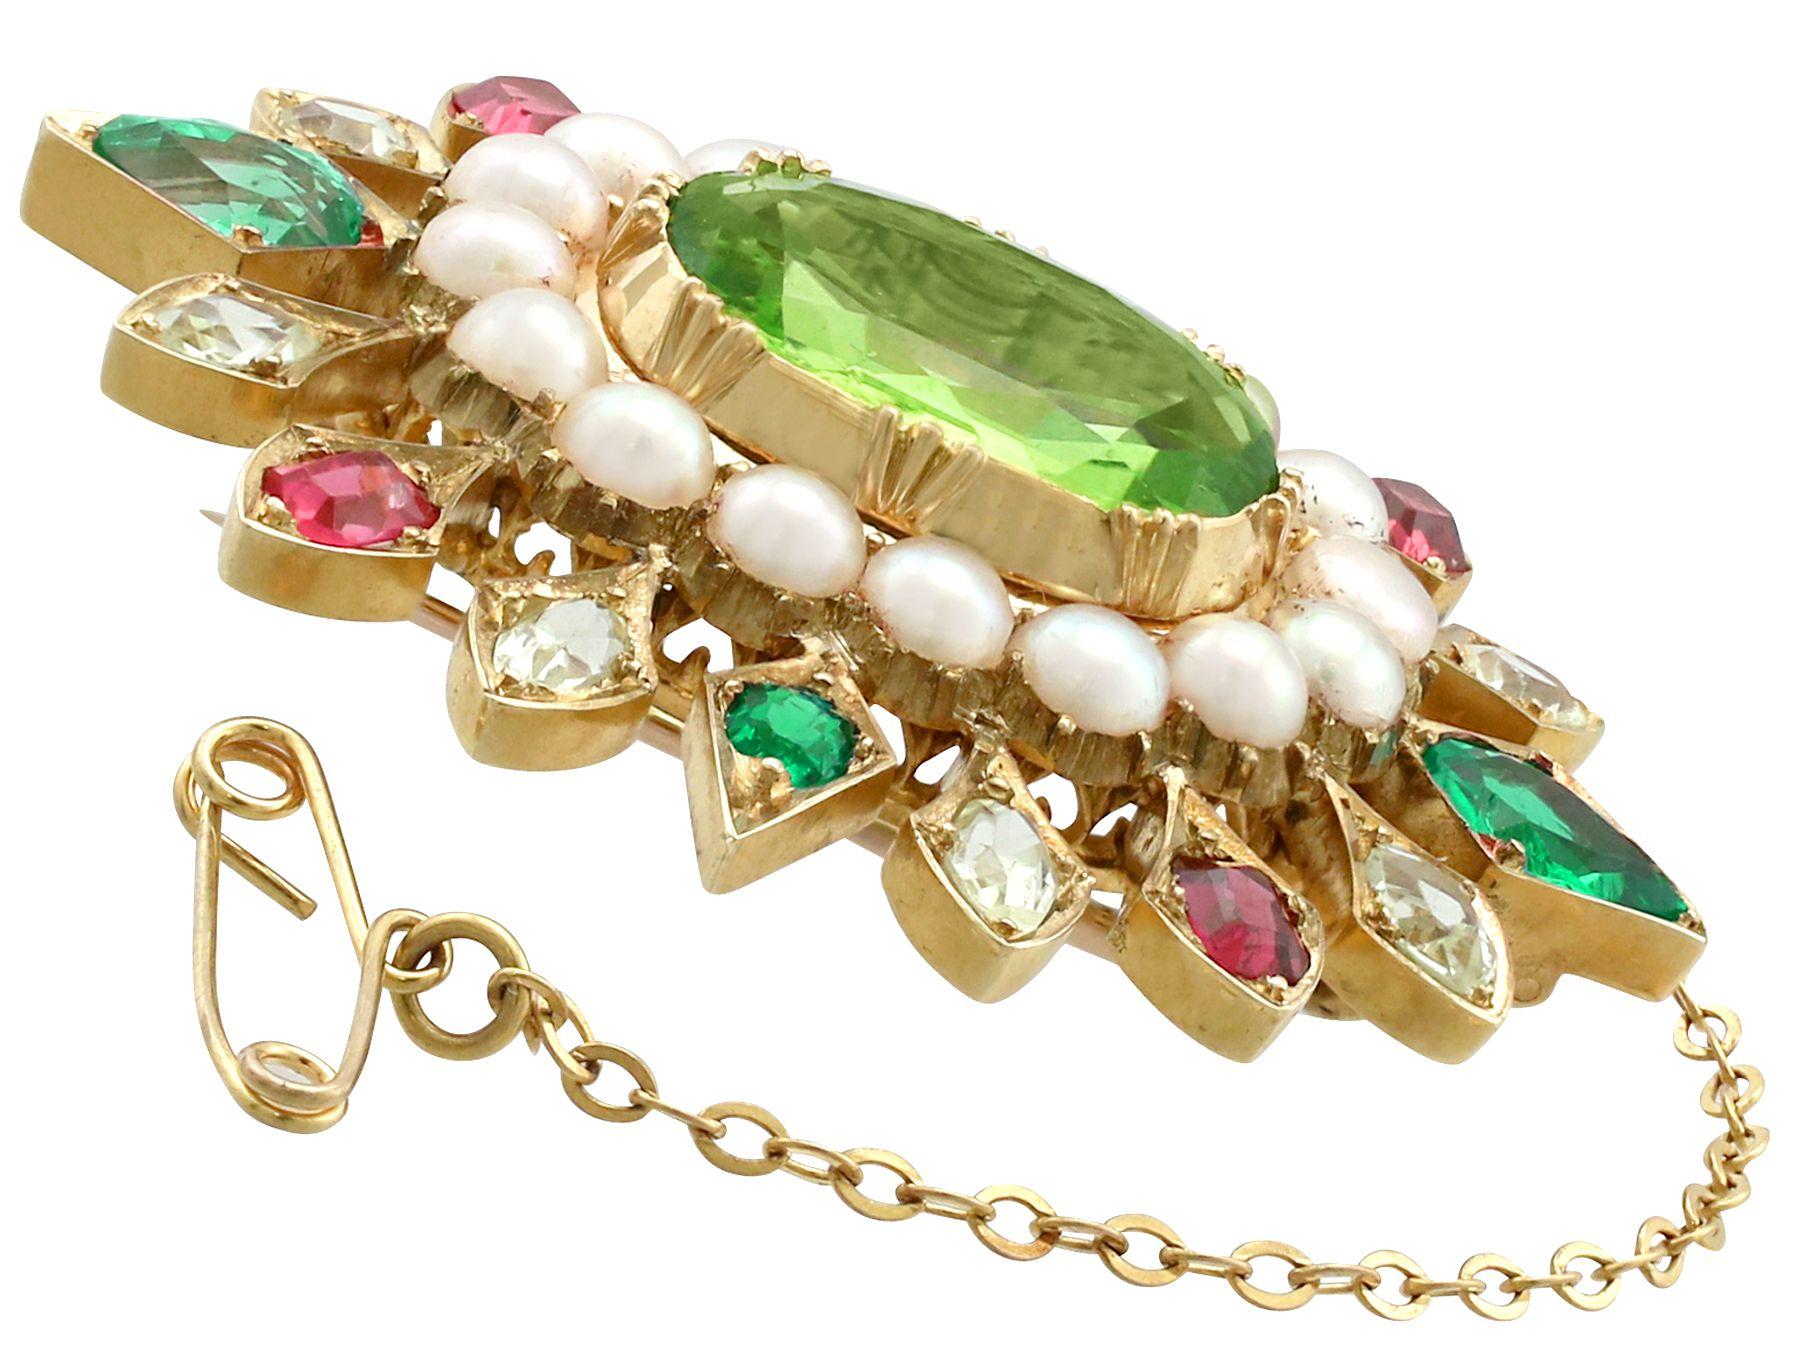 A stunning 4.35 carat peridot, 2.56 carat emerald and sapphire, seed pearl and 18 karat yellow gold brooch; part of our diverse antique jewelry collections.

This stunning, fine and impressive antique gemstone brooch has been crafted in 18k yellow